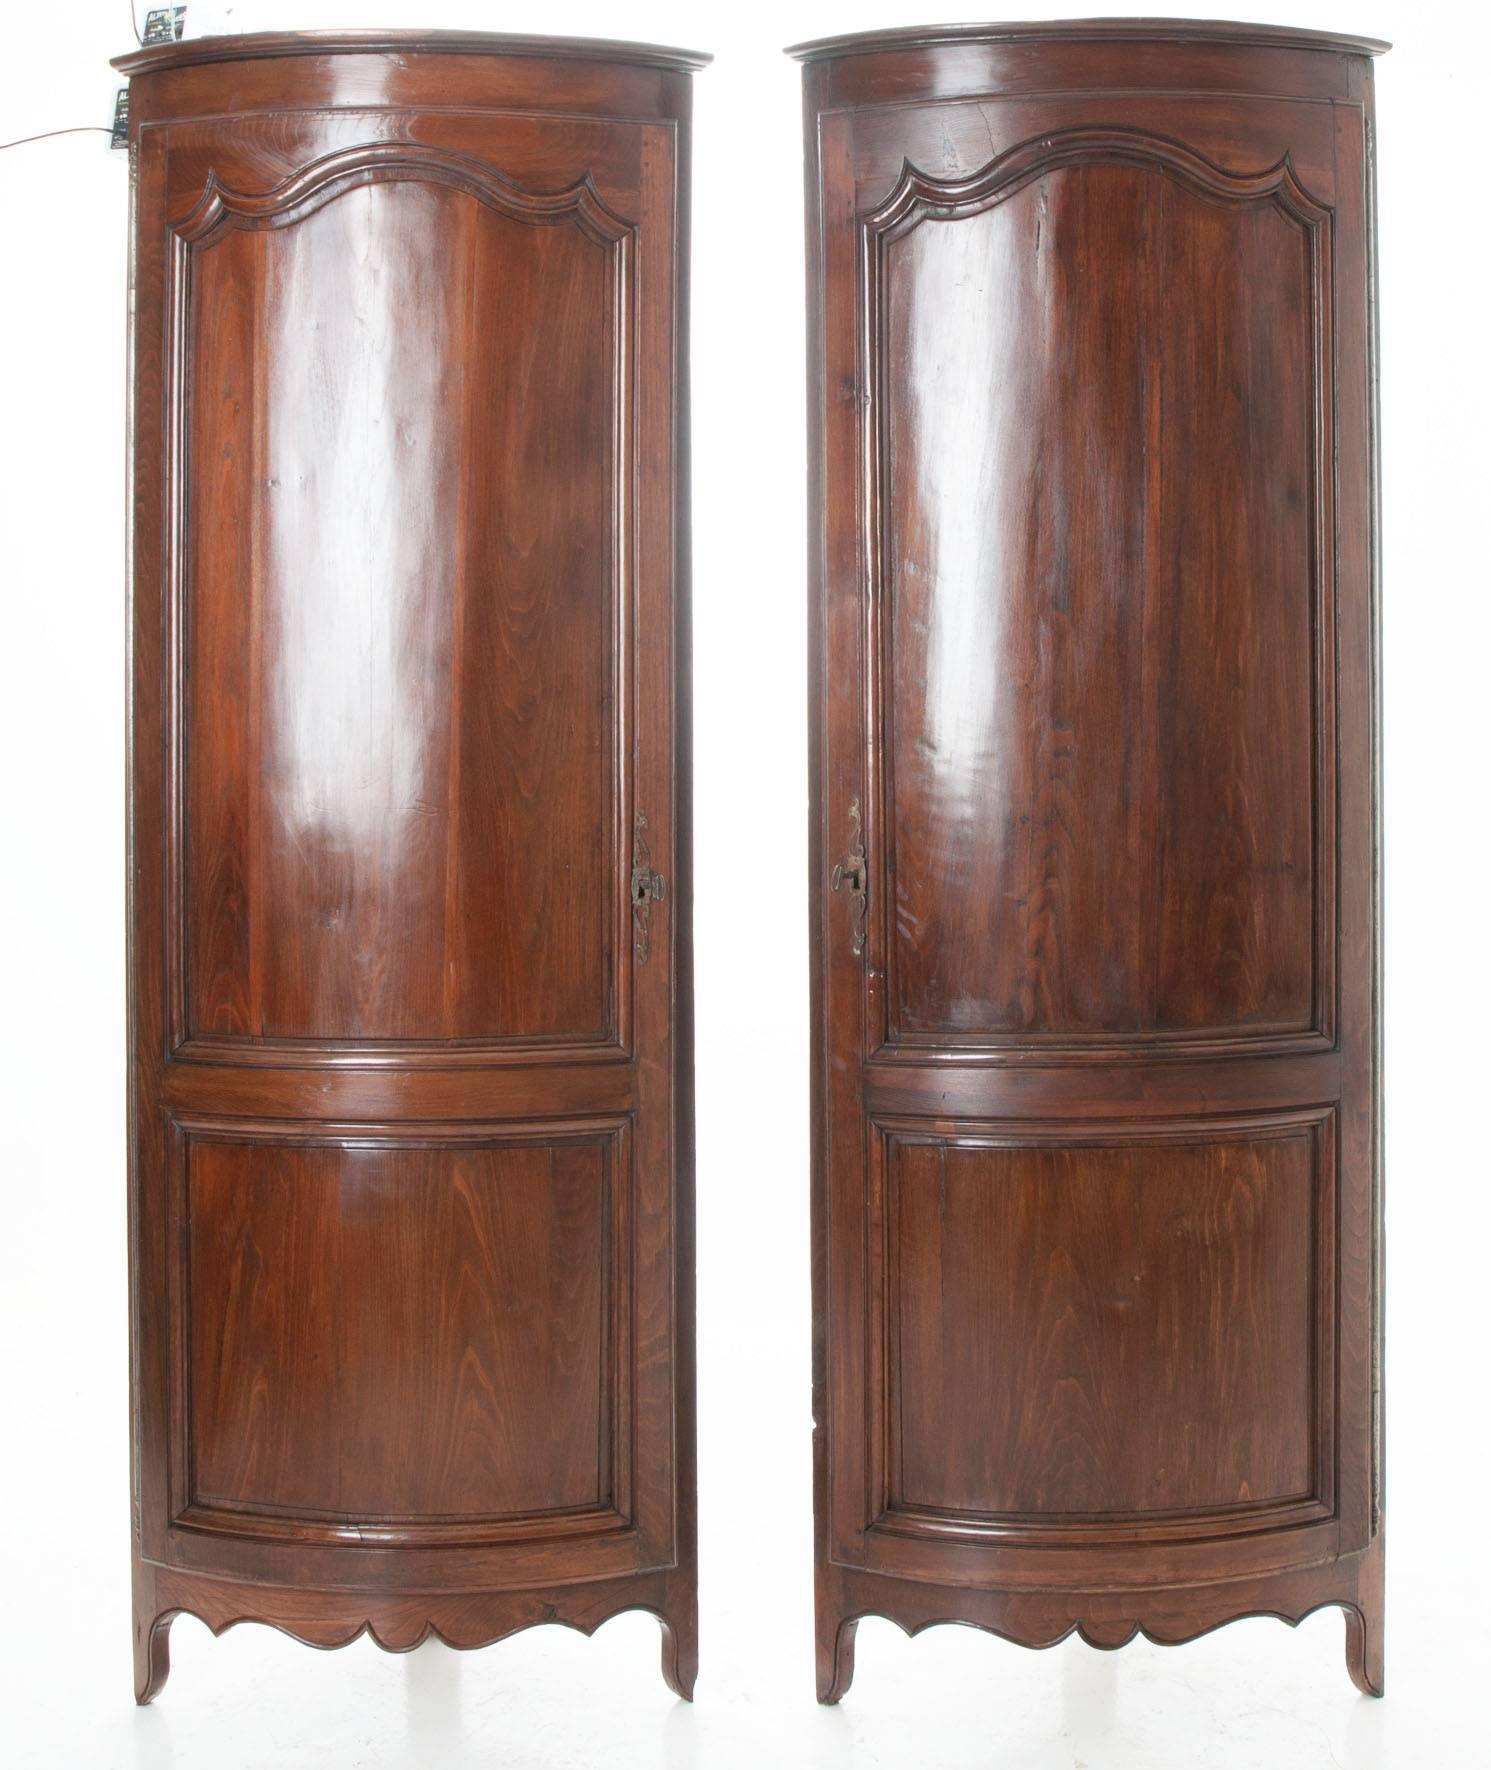 A wonderful pair of demi-lune Louis XV corner cabinets. Starting with a flat cornice down to a single demi-lune door swinging open on barrel hinges to a blue painted interior with fixed shelves. The locks, all original and in working condition.